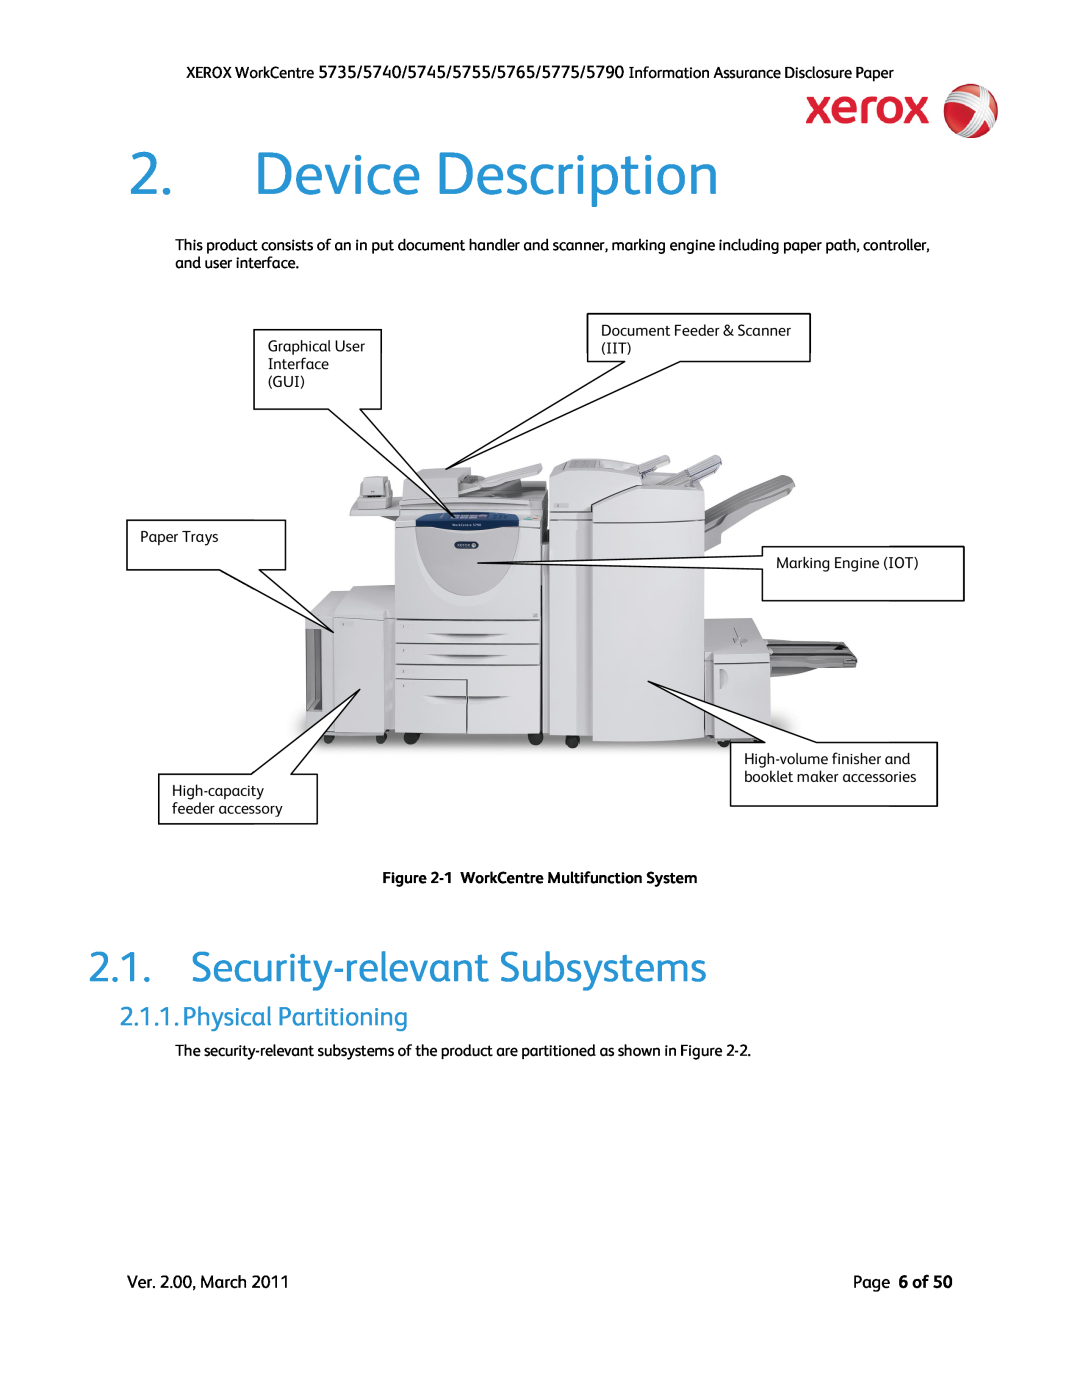 Xerox 5790, 5775 Device Description, Security-relevantSubsystems, Physical Partitioning, 1WorkCentre Multifunction System 